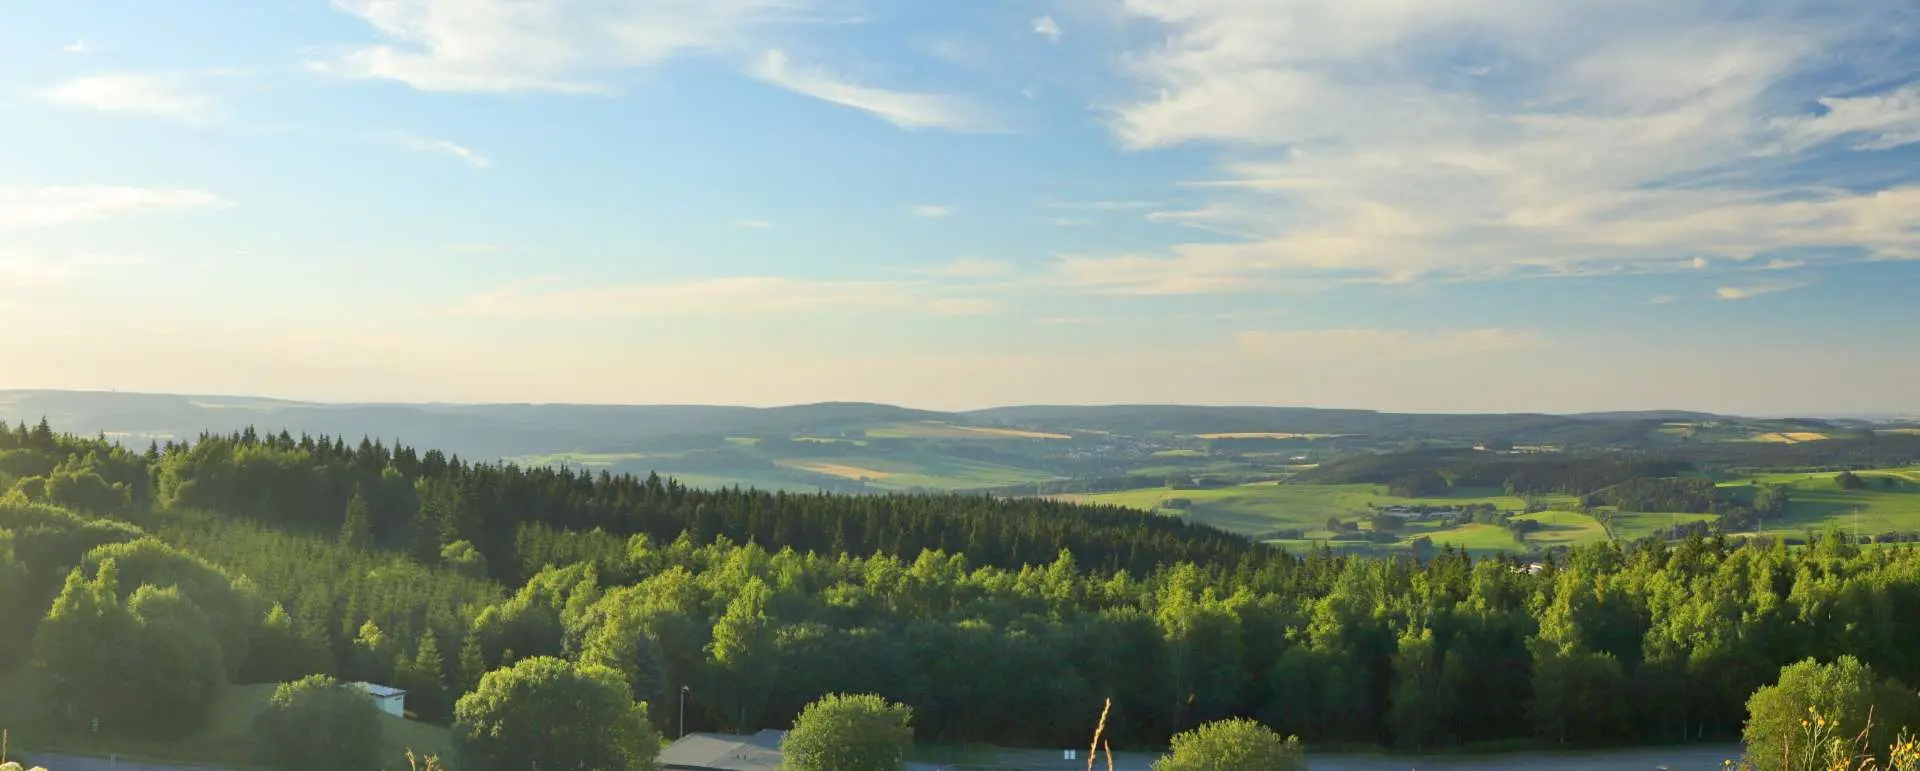 Ore Mountains - the destination for groups